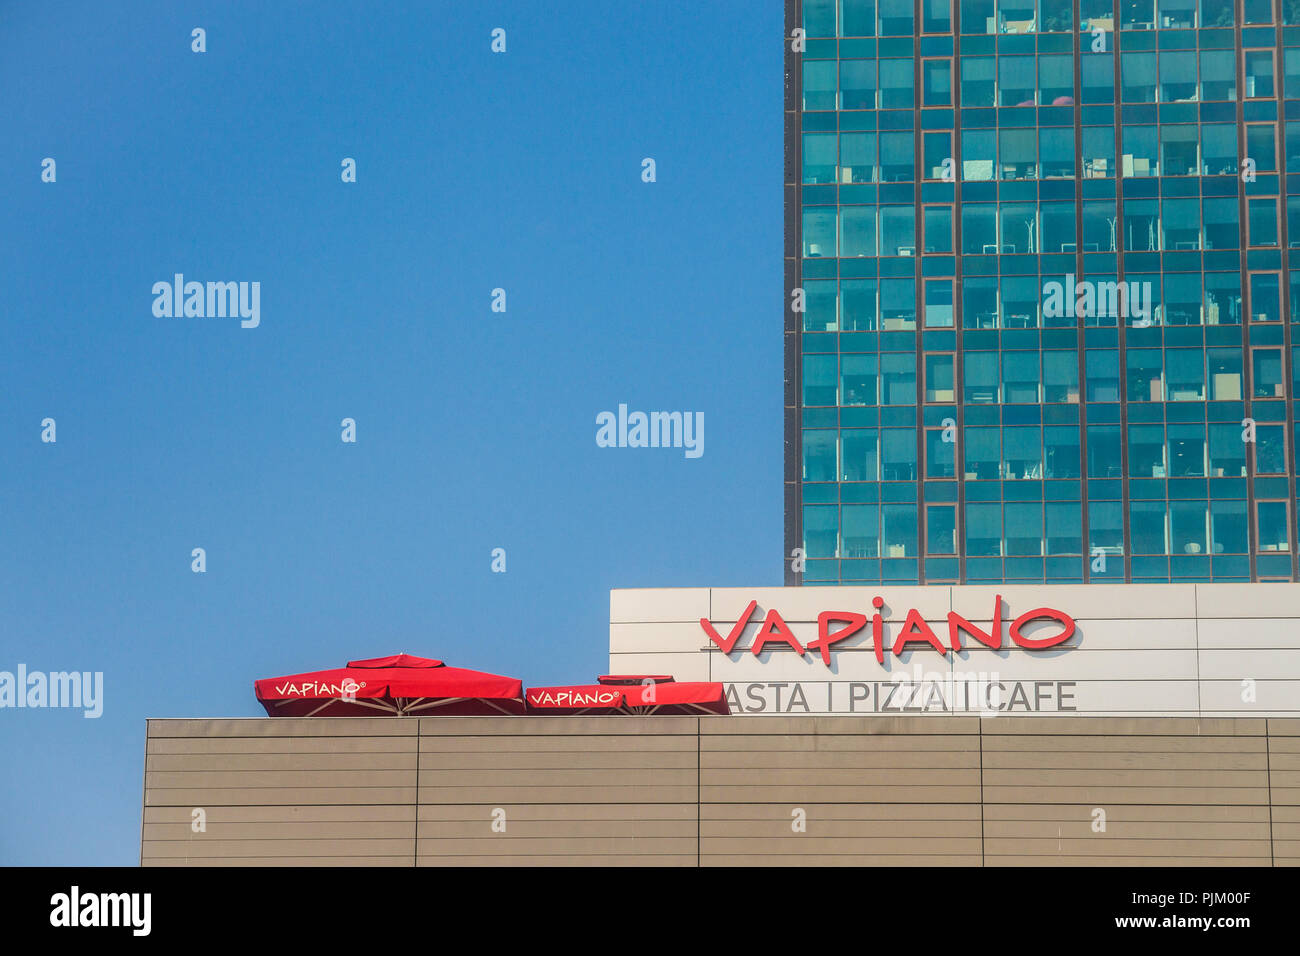 BELGRADE, SERBIA - AUGUST 13, 2018: Vapiano logo on their main restaurant for Serbia. Vapiano is a German franchise of Italian restaurants  Picture of Stock Photo